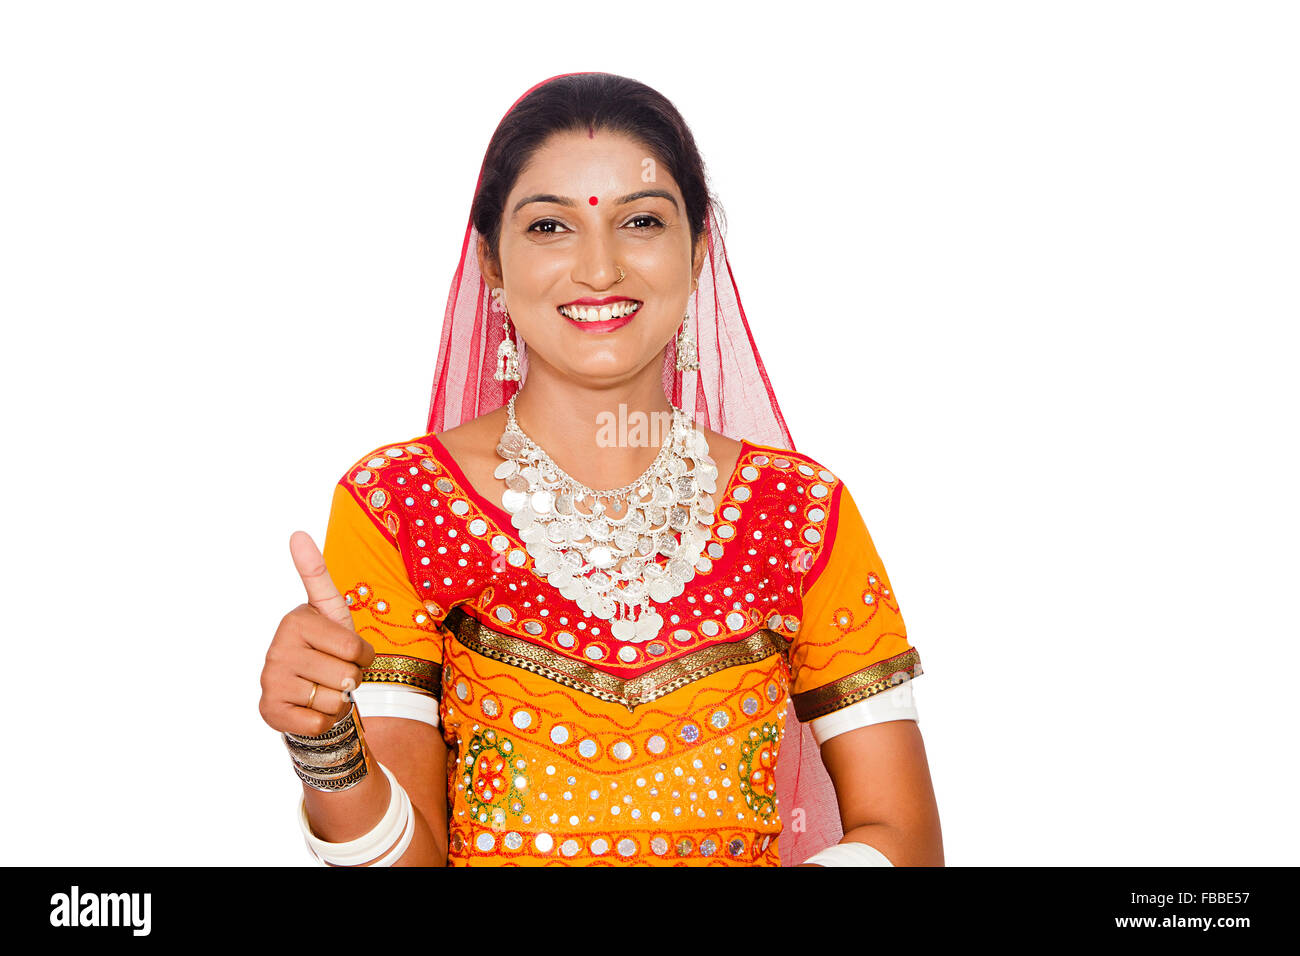 1 indian rural Gujrati woman Thumbs Up showing Stock Photo